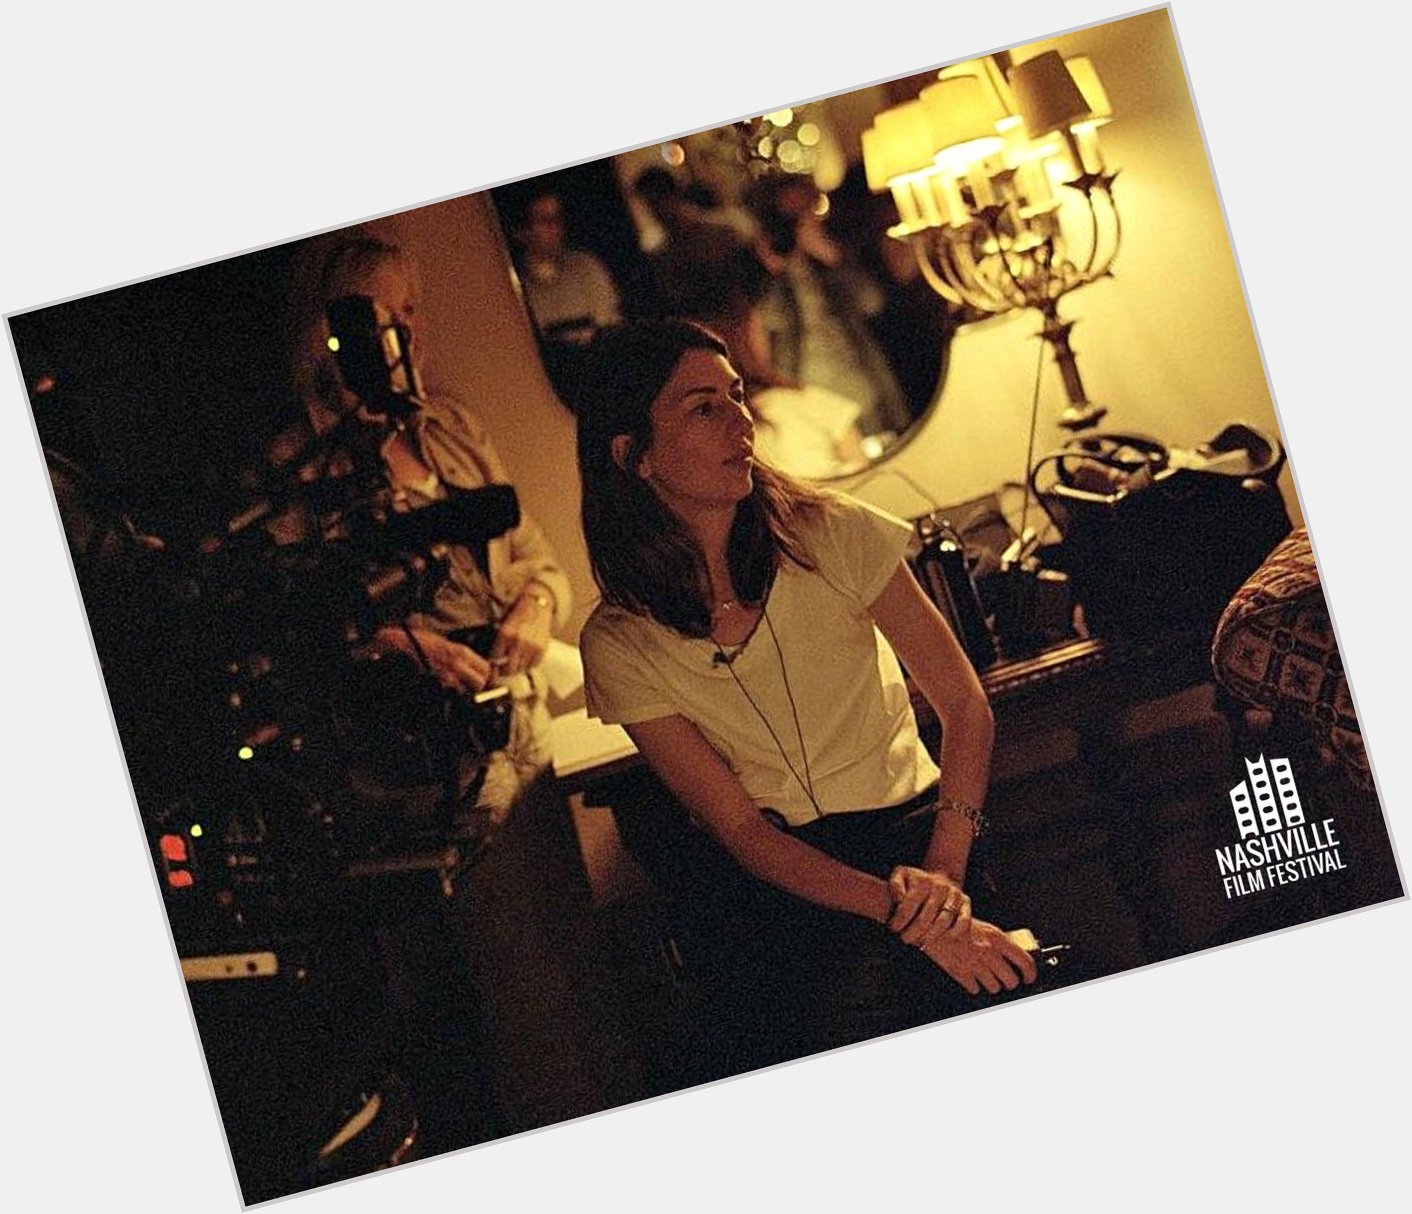 Happy birthday to the endlessly beguiling Sofia Coppola! Which of her films are you watching today to celebrate? 